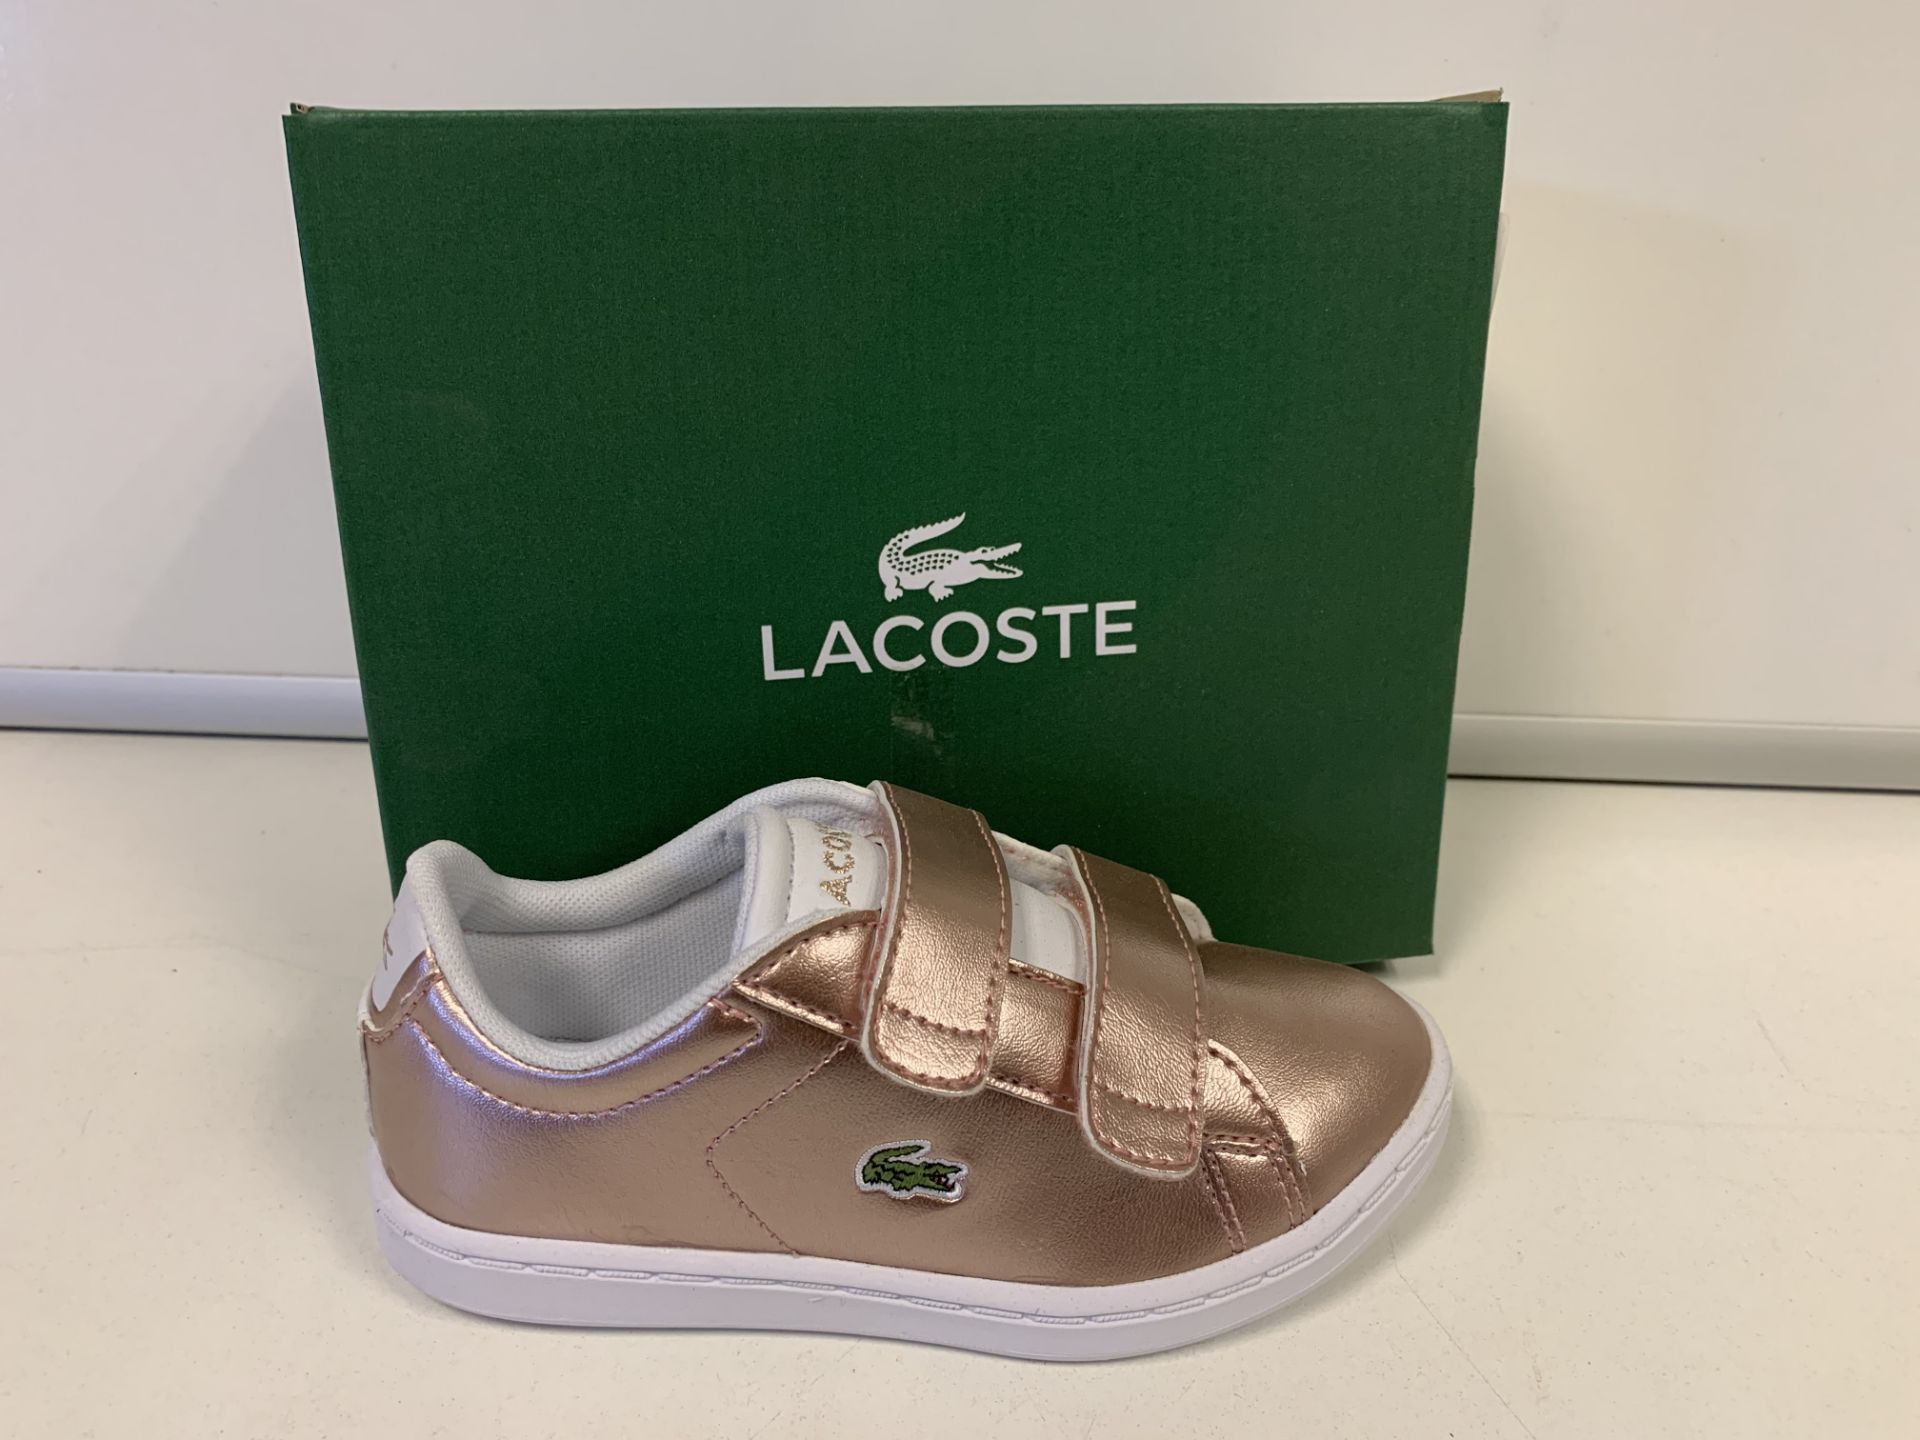 (NO VAT) 4 X BRAND NEW LACOSTE ROSE GOLD TRAINERS SIZE i9